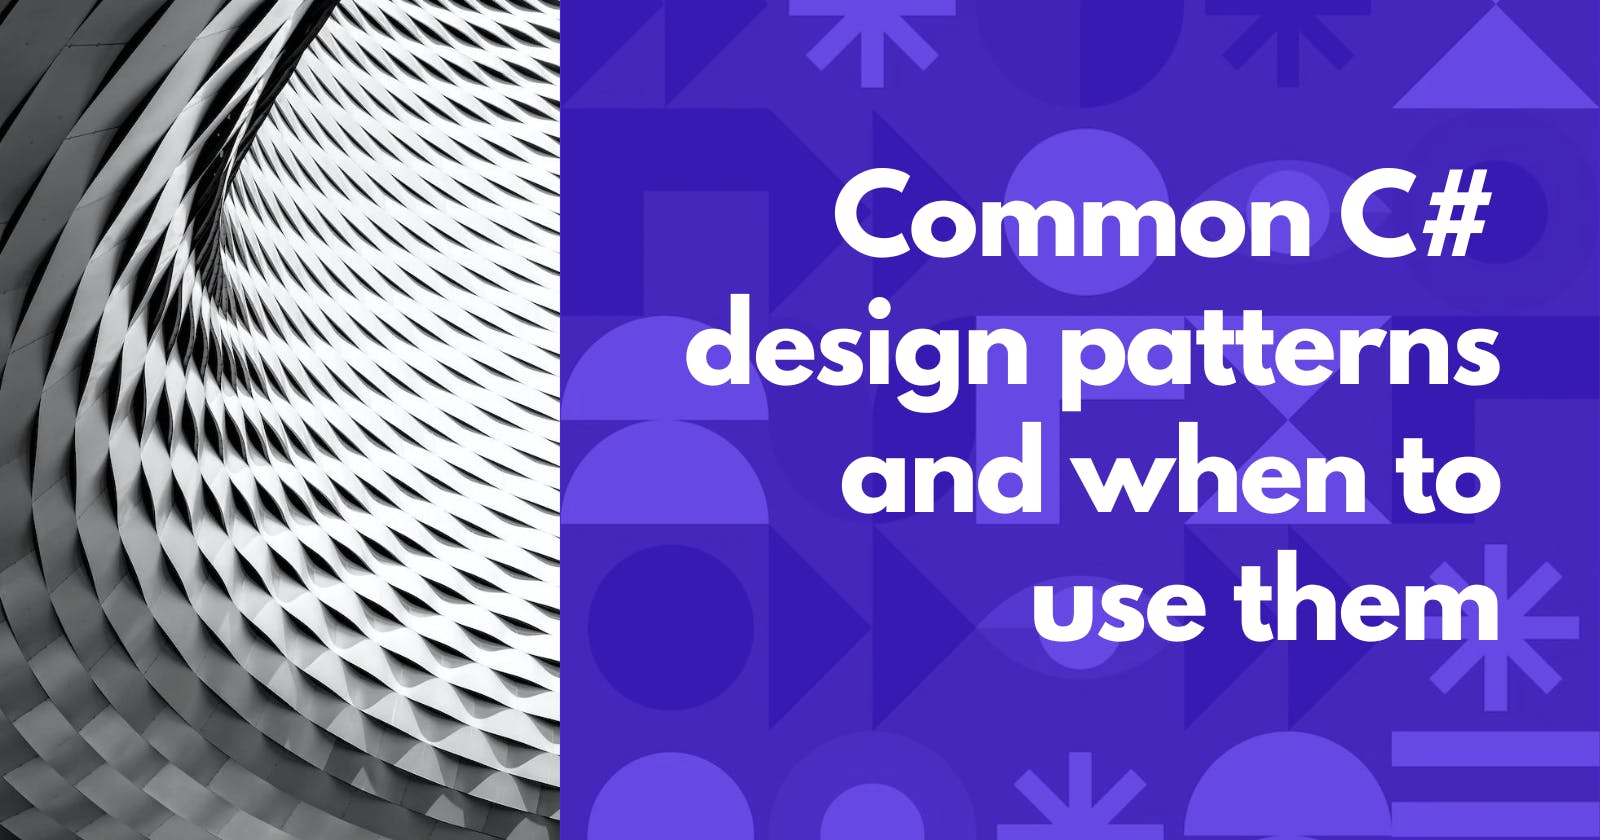 Common C# design patterns and when to use them